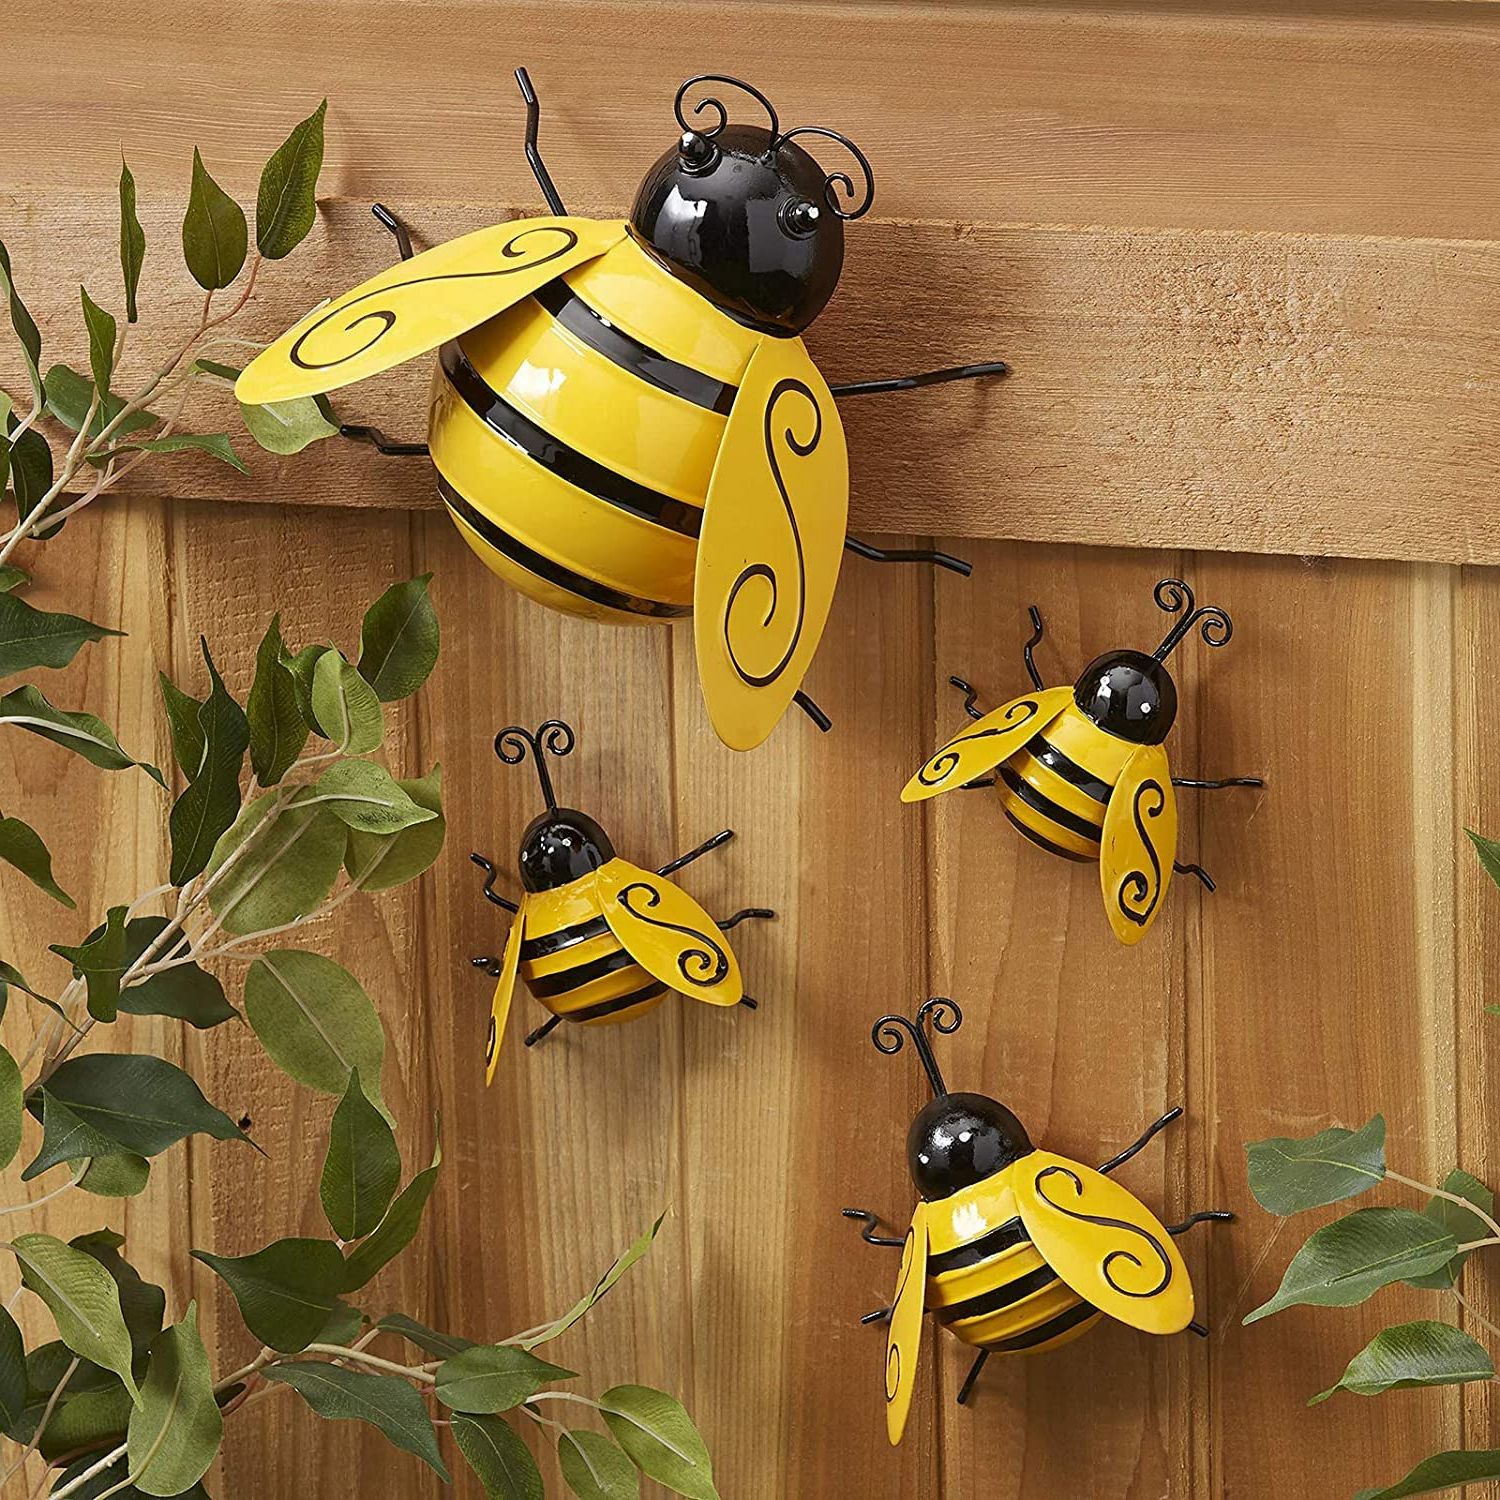 Amazon: Yungeln Metal Wall Art, 4pcs Bumble Bee Decor, 3d Iron Art  Sculpture Hanging Decorations For Outdoor Home Garden : Patio, Lawn & Garden With Popular Iron Outdoor Hanging Wall Art (View 11 of 15)